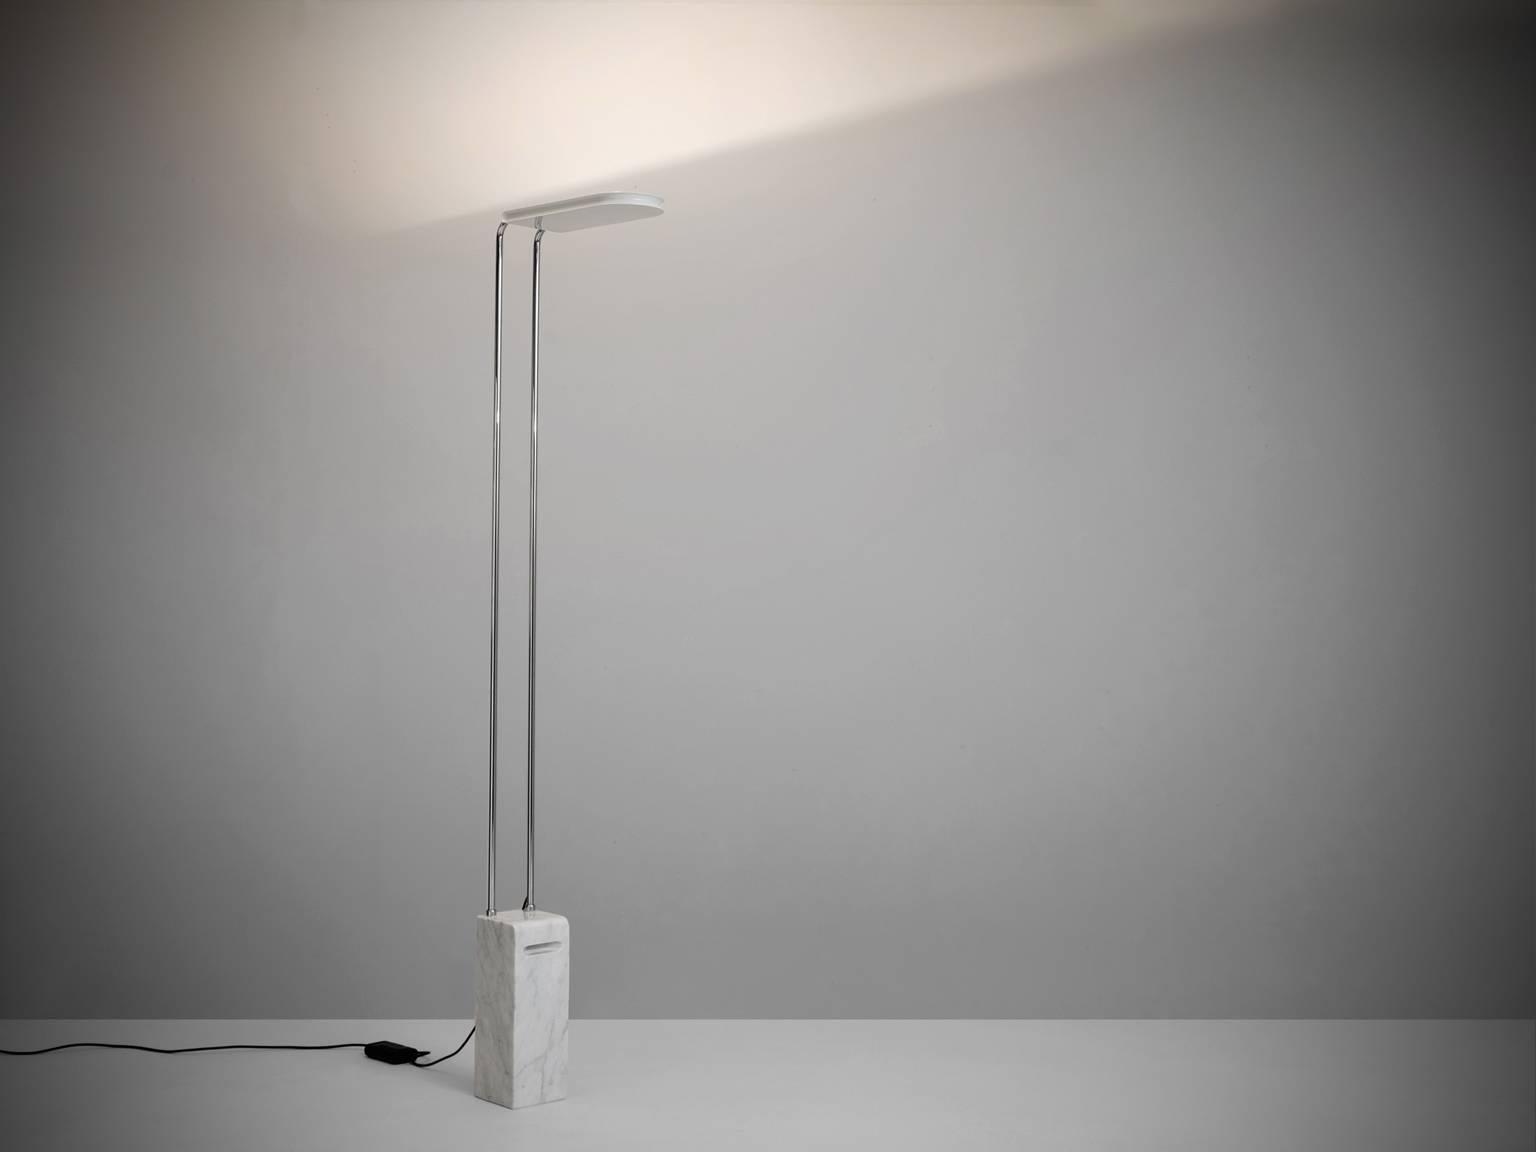 Floor lamp 'Gesto Terra' in marble, steel and plastic, by Bruno Gecchelin for Skipper, Italy 1974. Elegant floor lamp with marble base. The frame is from tubular steel. This is an uplight, which means the lux is on the upside of the lamp. In this